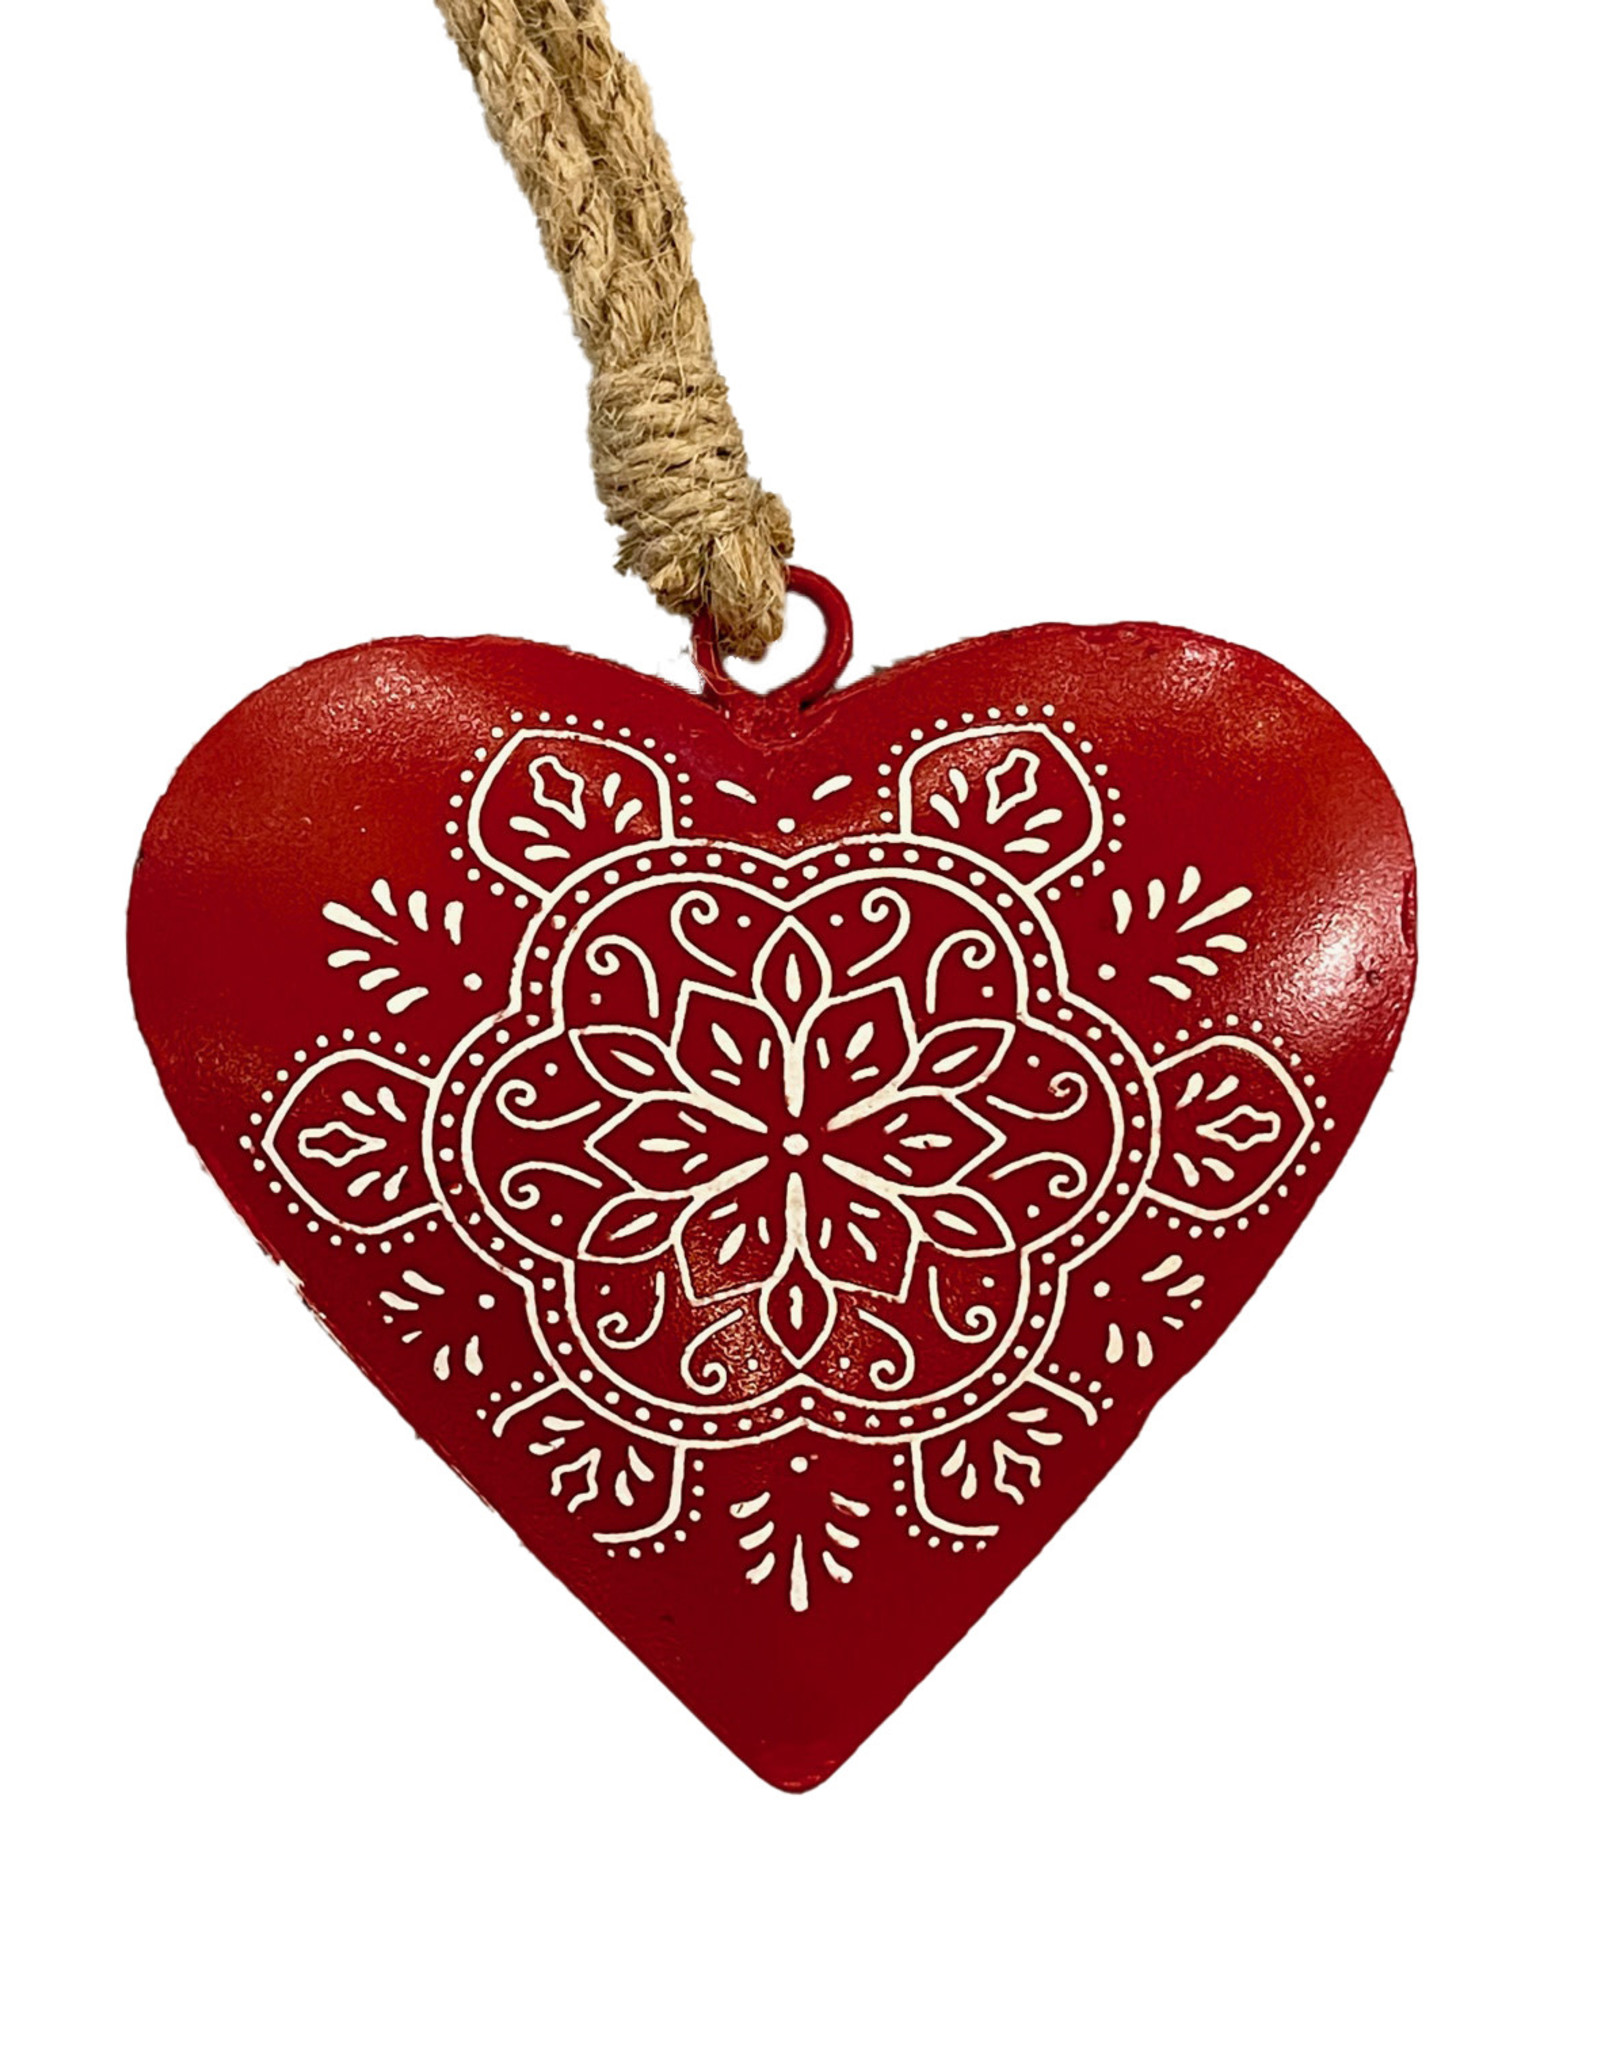 Hand-Painted Metal Alsace Heart Ornament Red - 4"x4"x1"